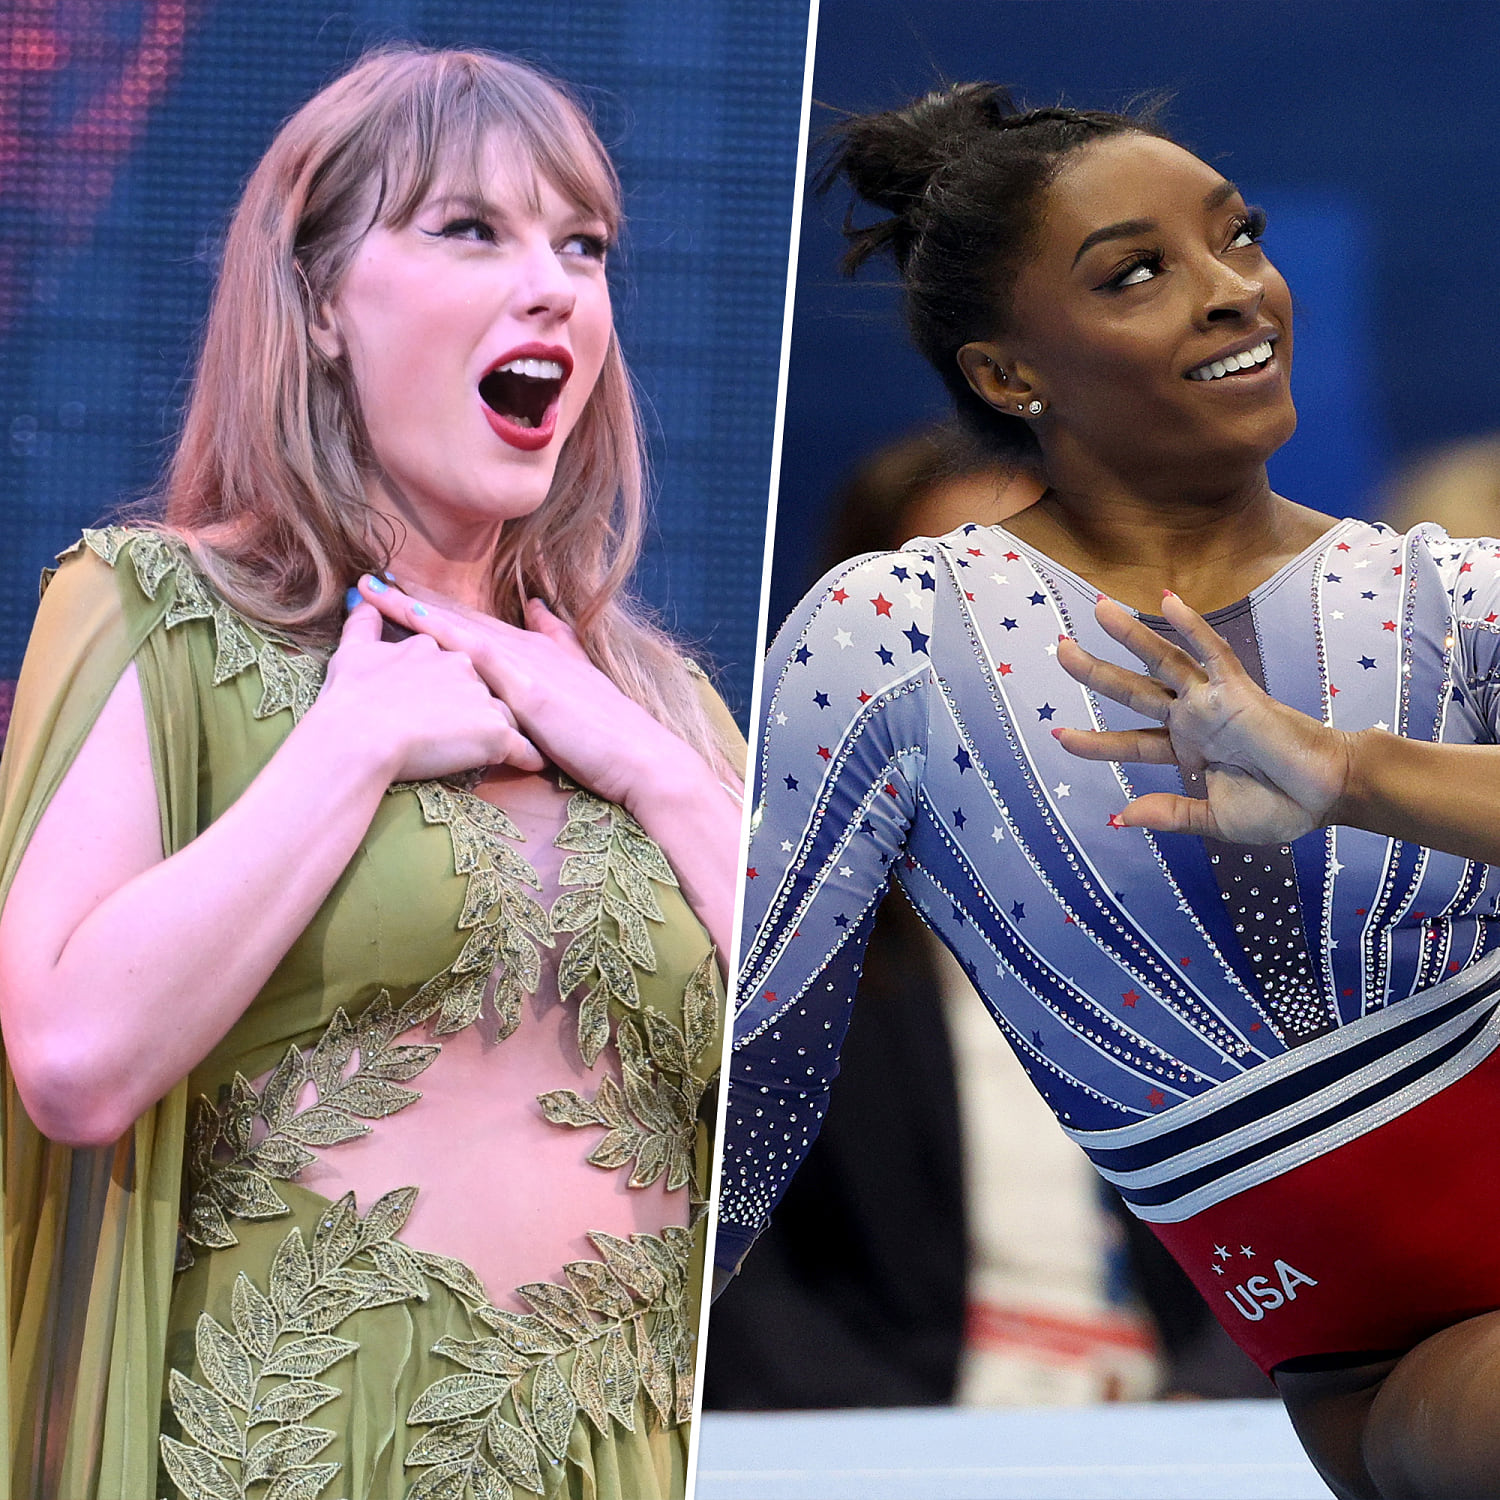 Taylor Swift reacts to Simone Biles' floor routine featuring her song: 'Watched this so many times'